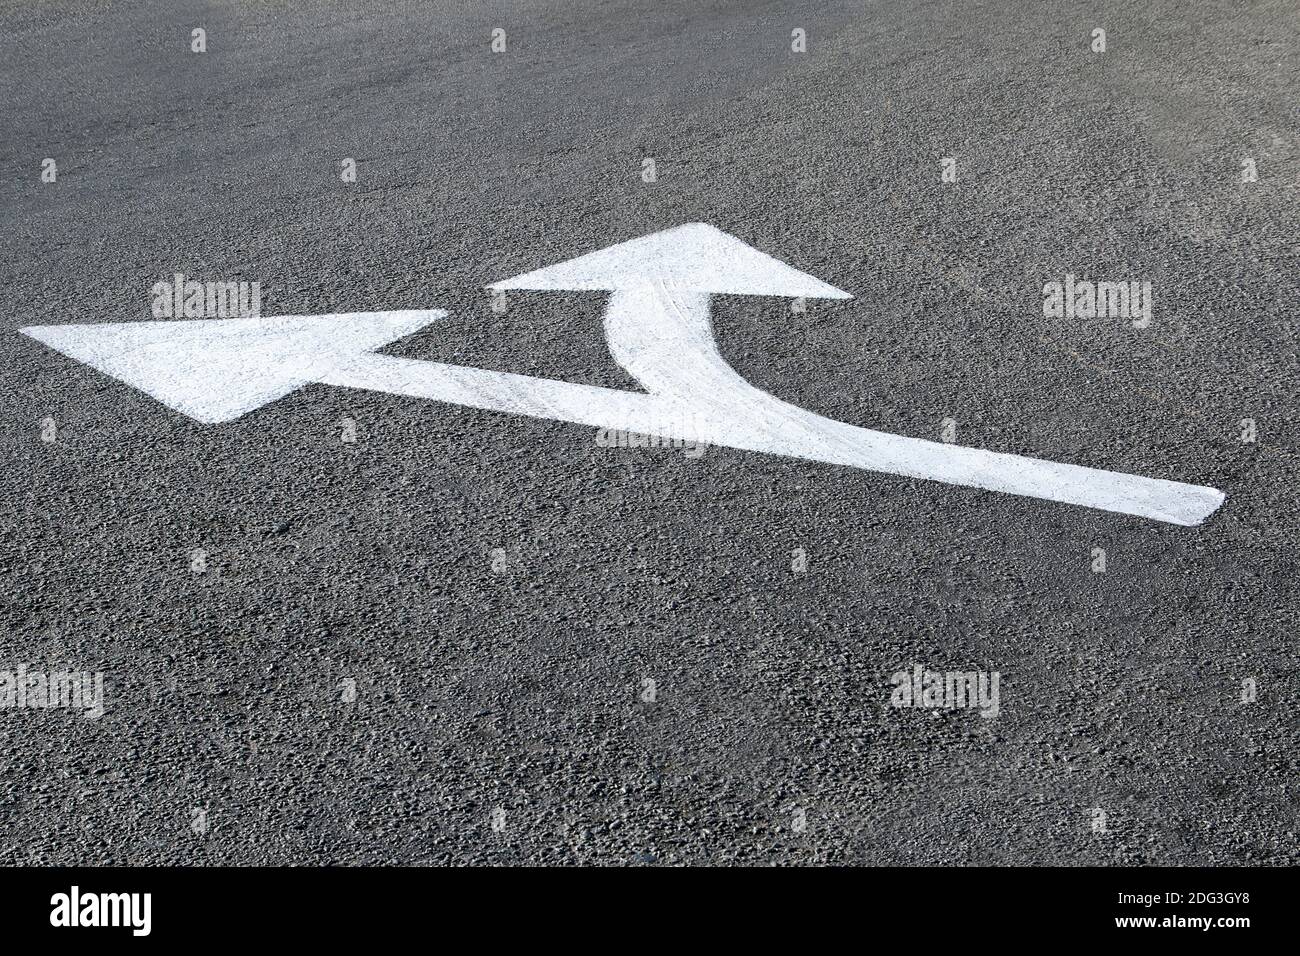 white directional arrow drawn on the asphalt ground - concept of paths and directions Stock Photo